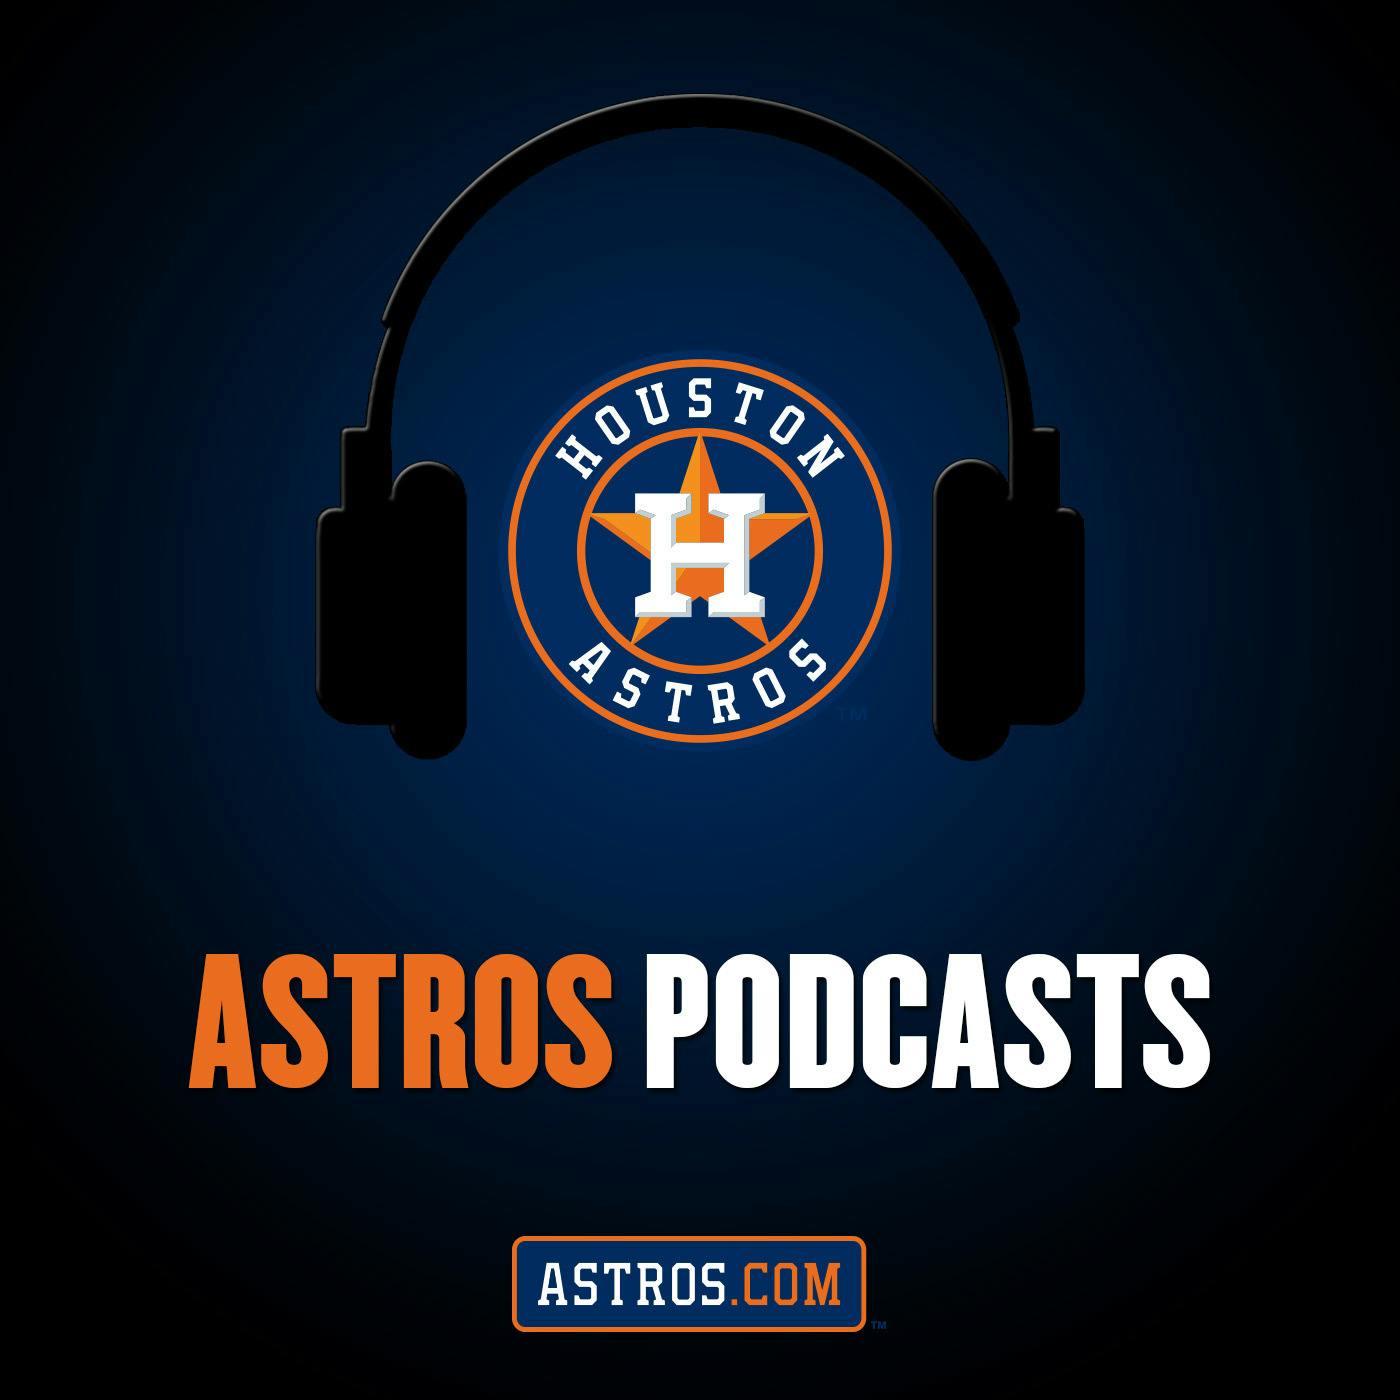 10/27 Astros Sunday Radio Roundtable with Jeff Luhnow, Game 5 W.S. Preview